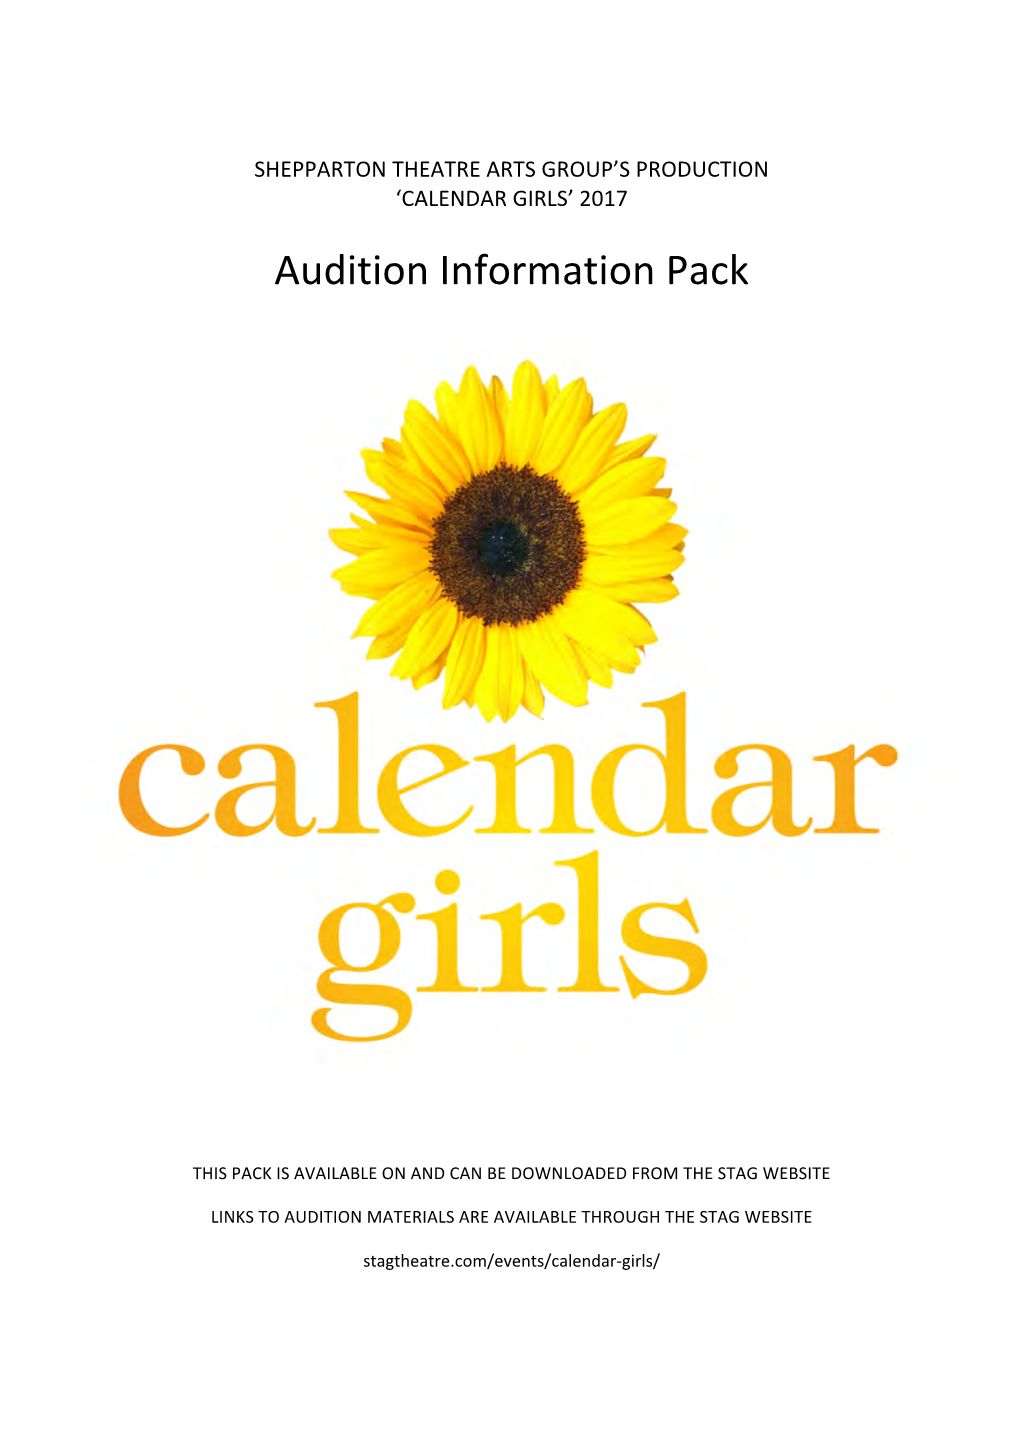 CGS Audition Info Pack